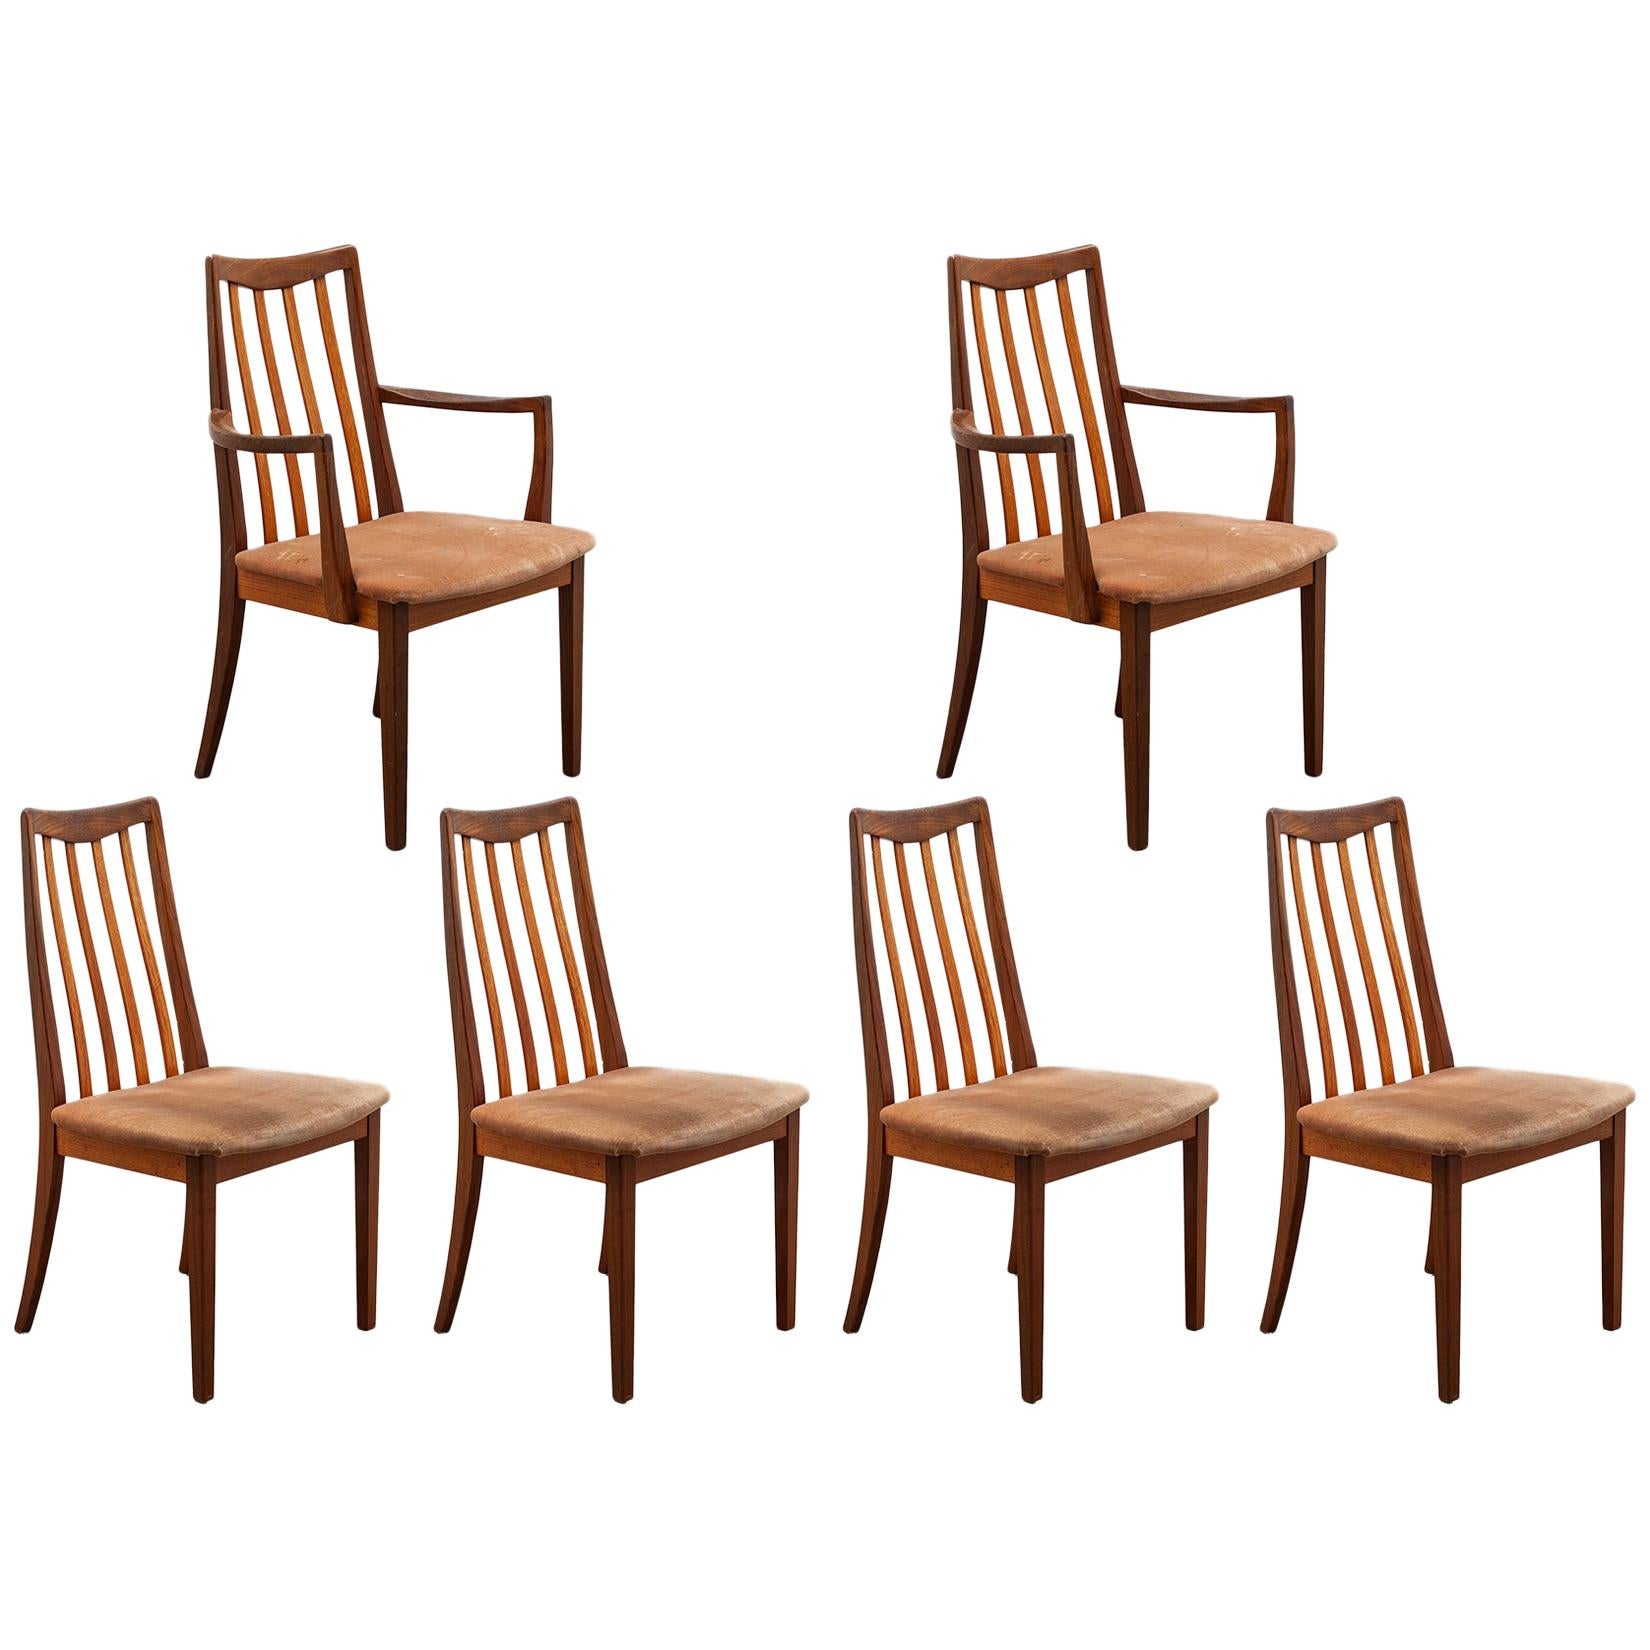 Set of Six Dining Chairs "Model EVA" by Niels Kofoed, Denmark, 1960s